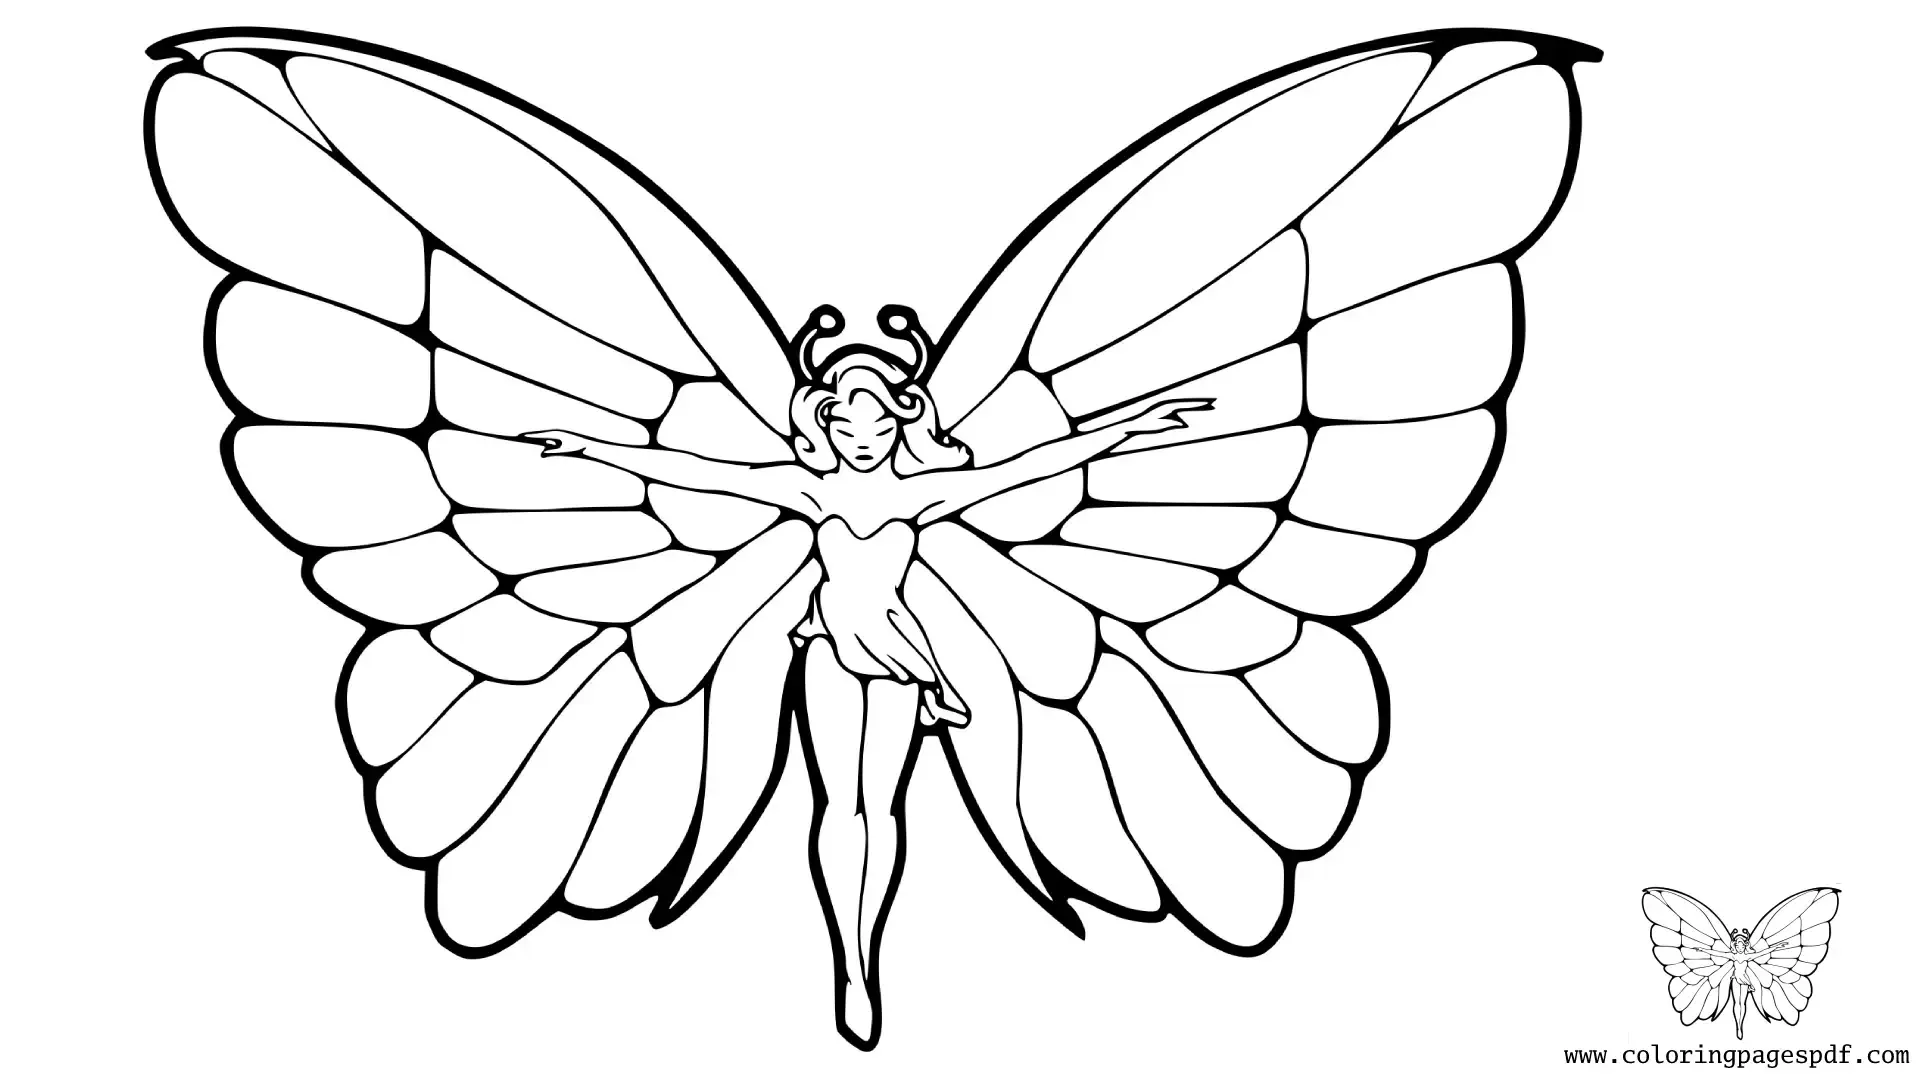 Coloring Page Of A Butterfly Fairy